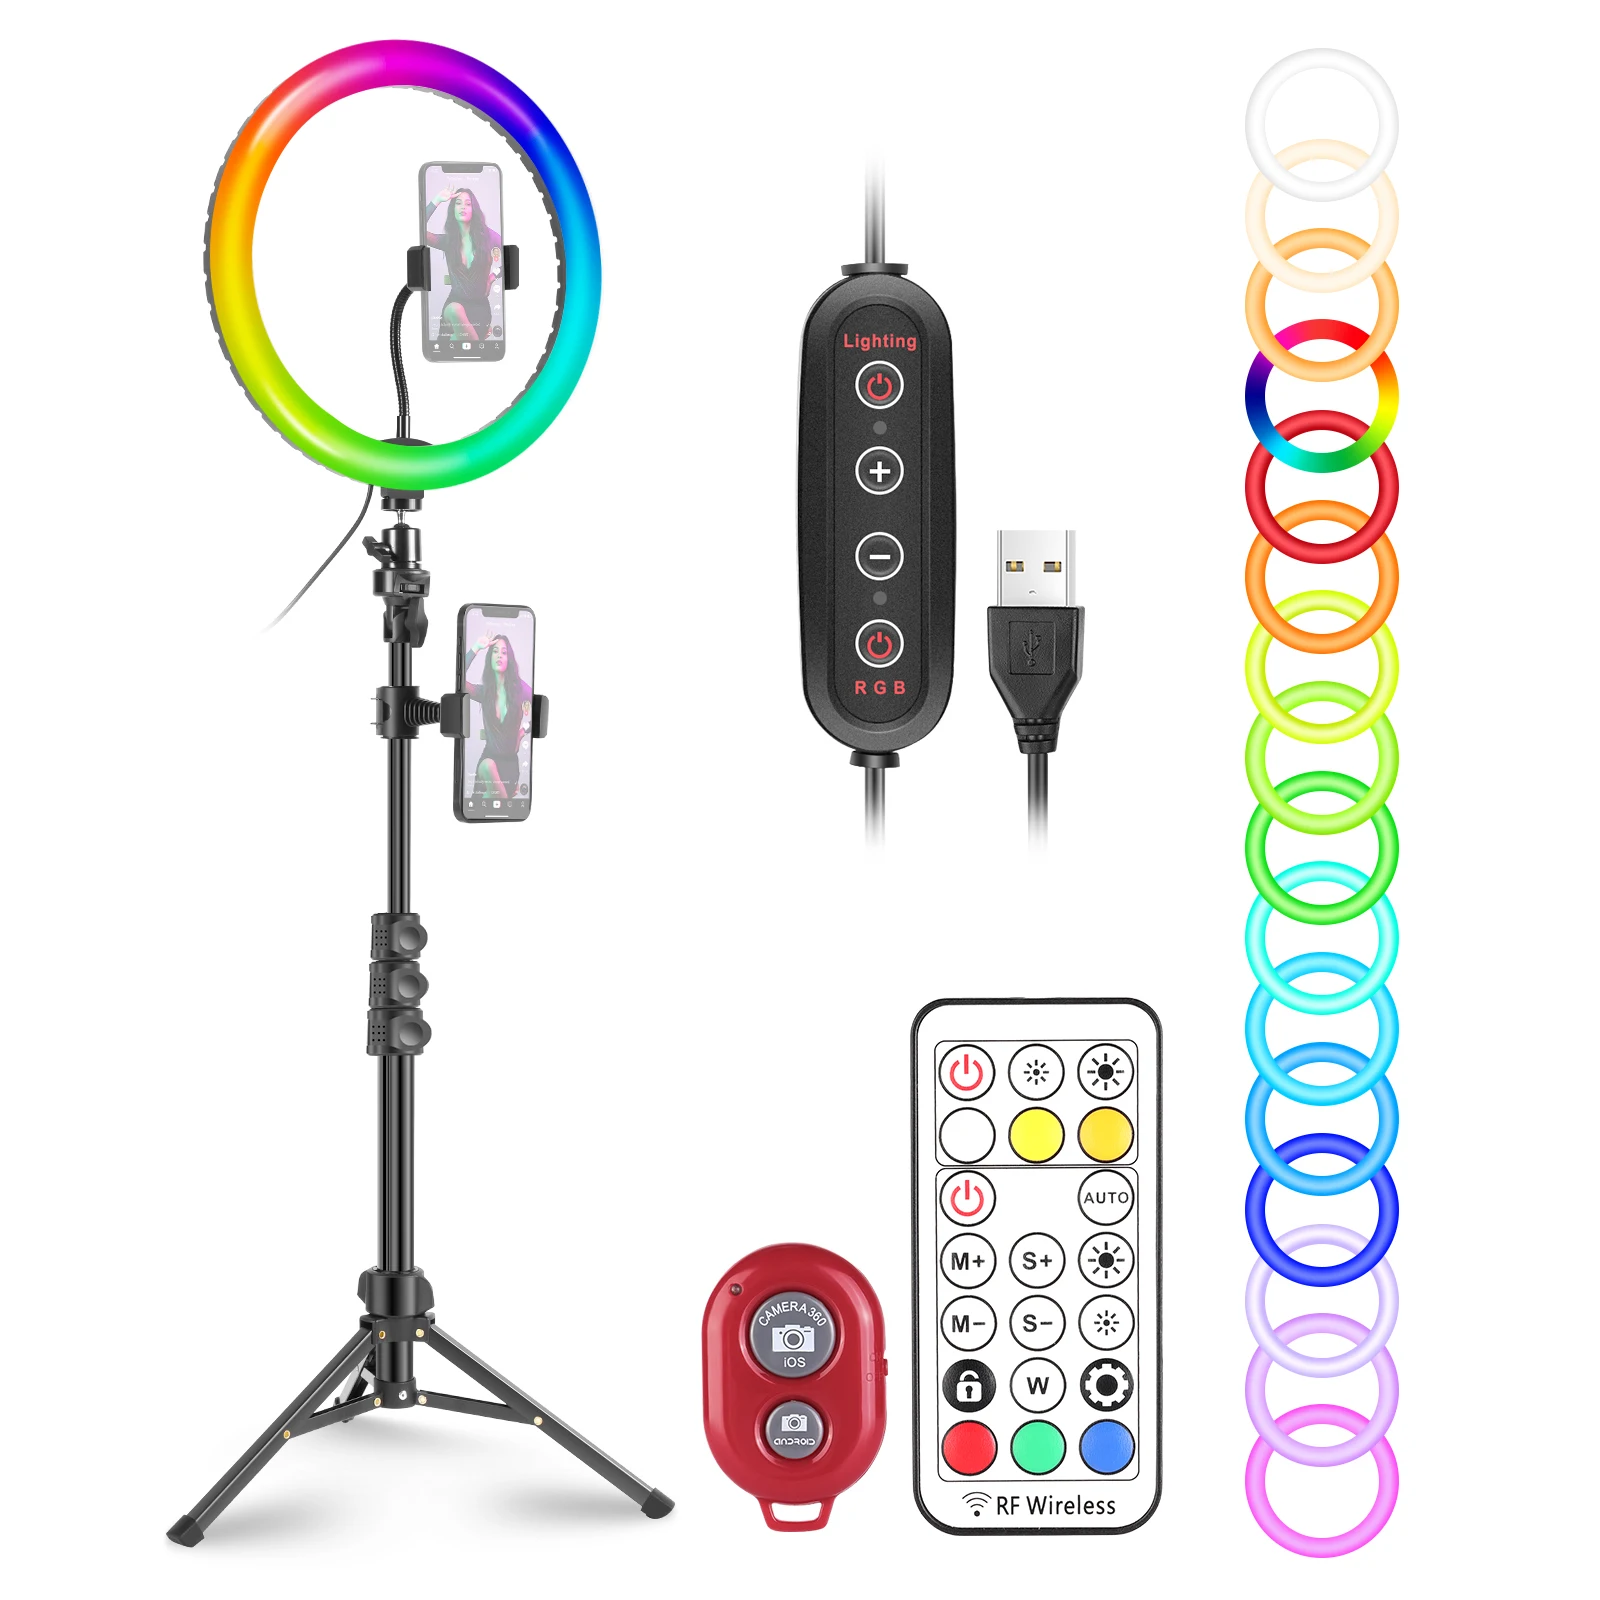 

Neewer 12" RGB Selfie Ring Light,LED Ringlight with Phone Holder,Remote Control for Live Streaming/YouTube/Video Shooting